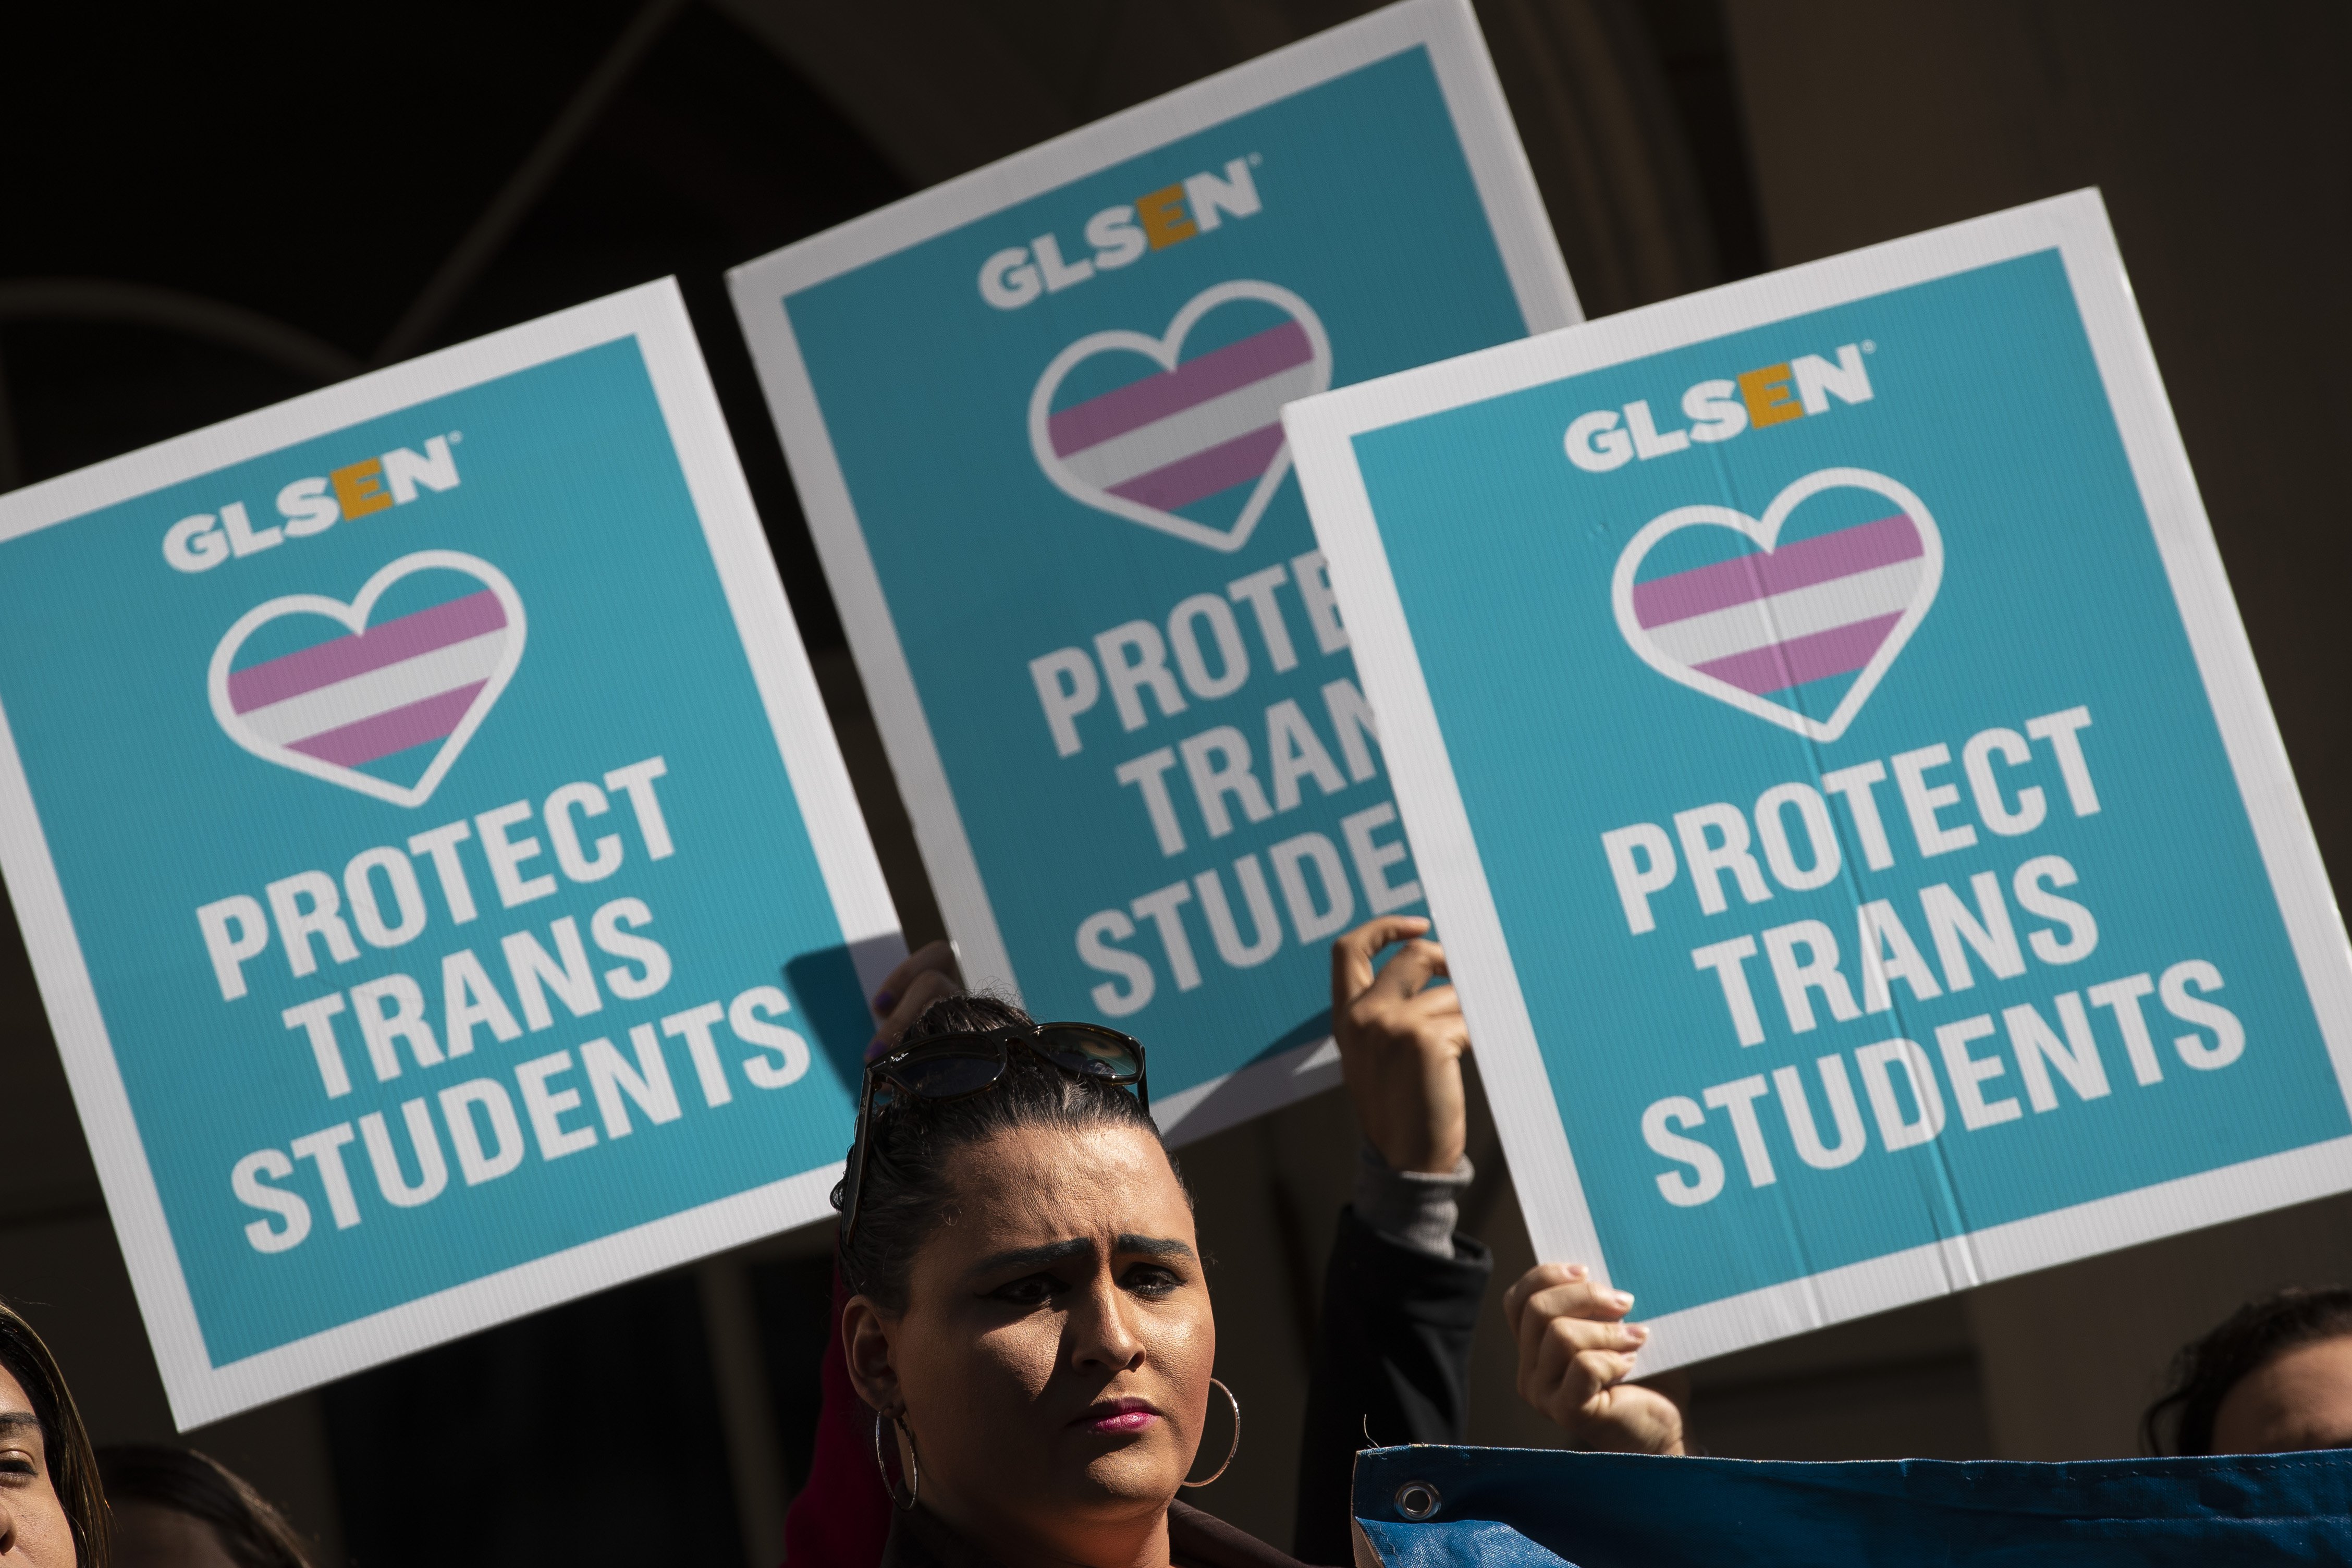 LGTB activists protesting outside New York City Hall | Photo: Getty Images